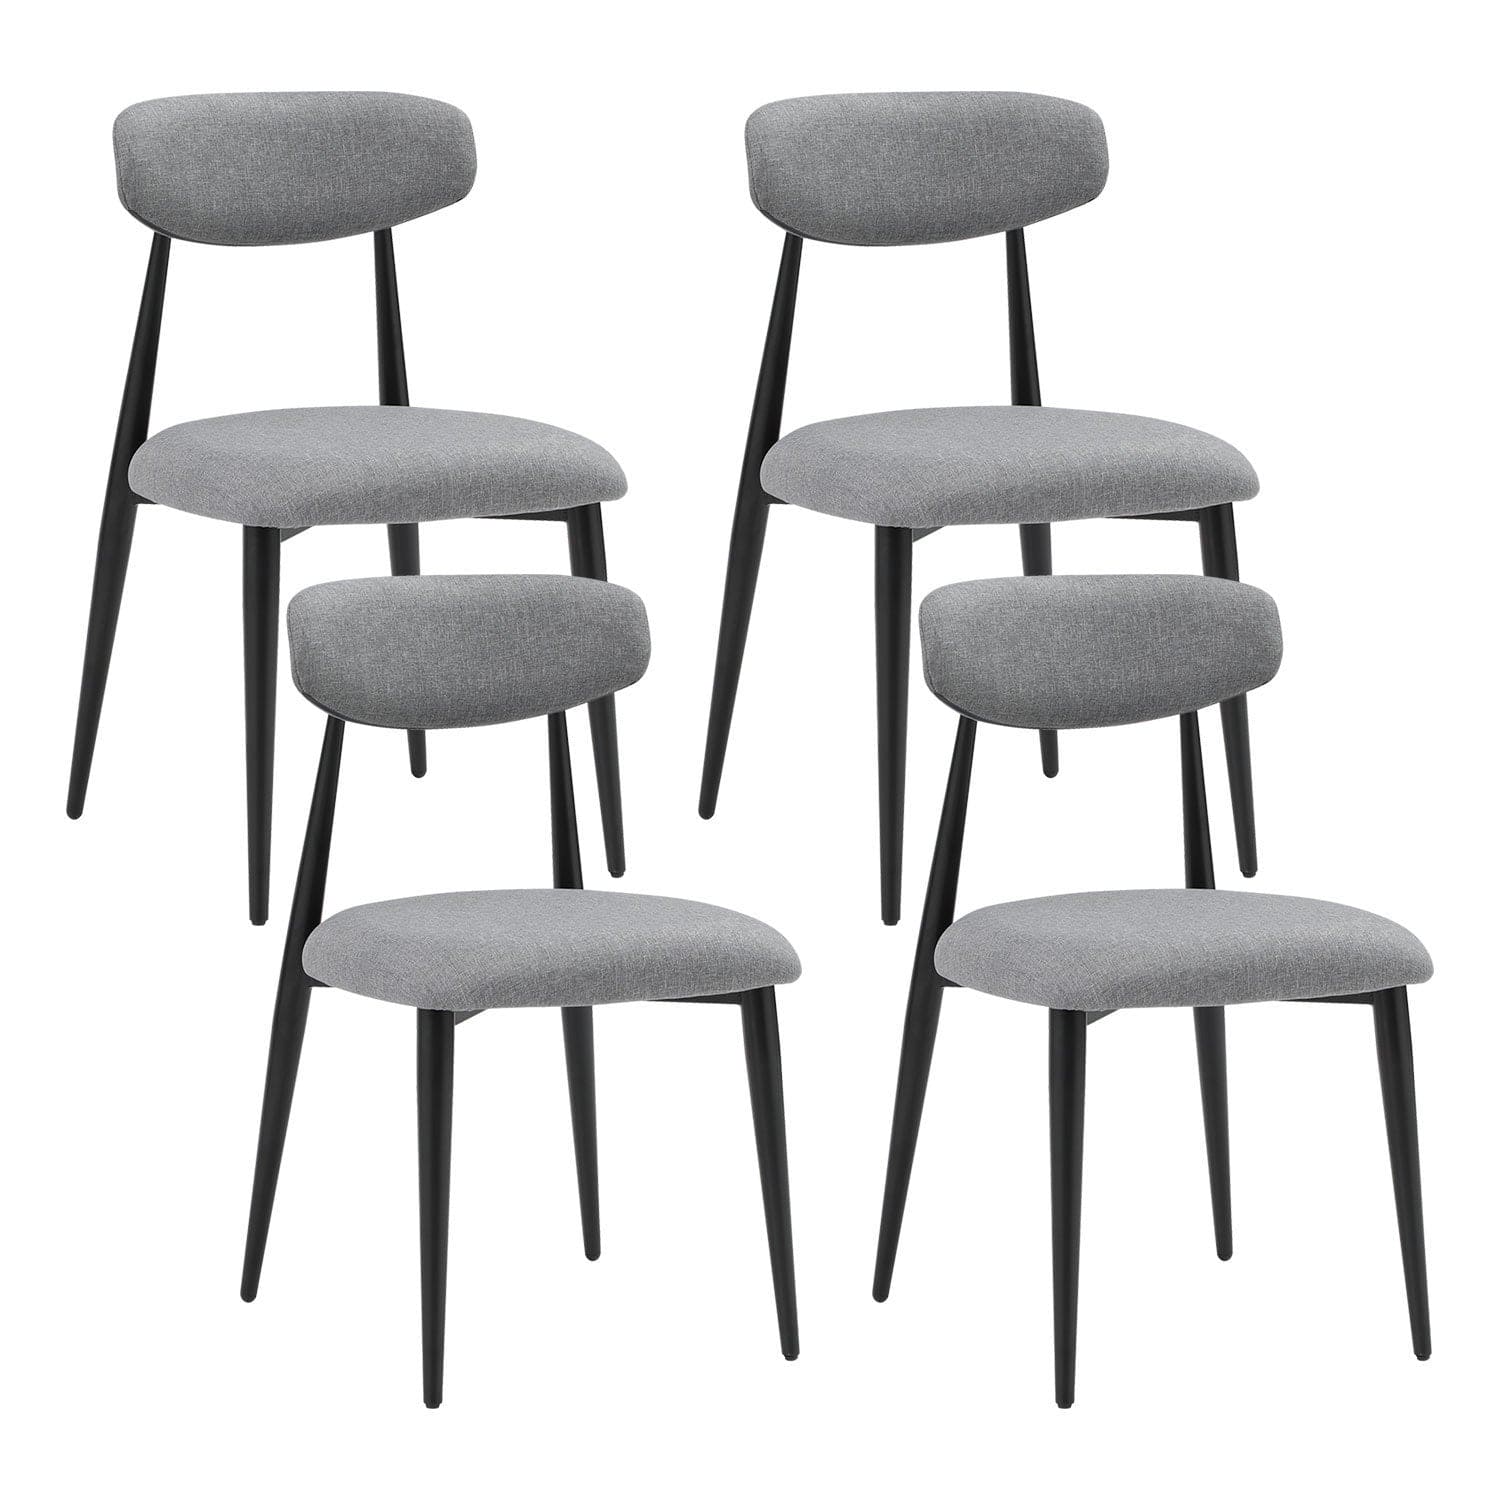 (Set of 4) Modern Dining Chairs , Curved Backrest Round Upholstered and Metal Frame,Grey